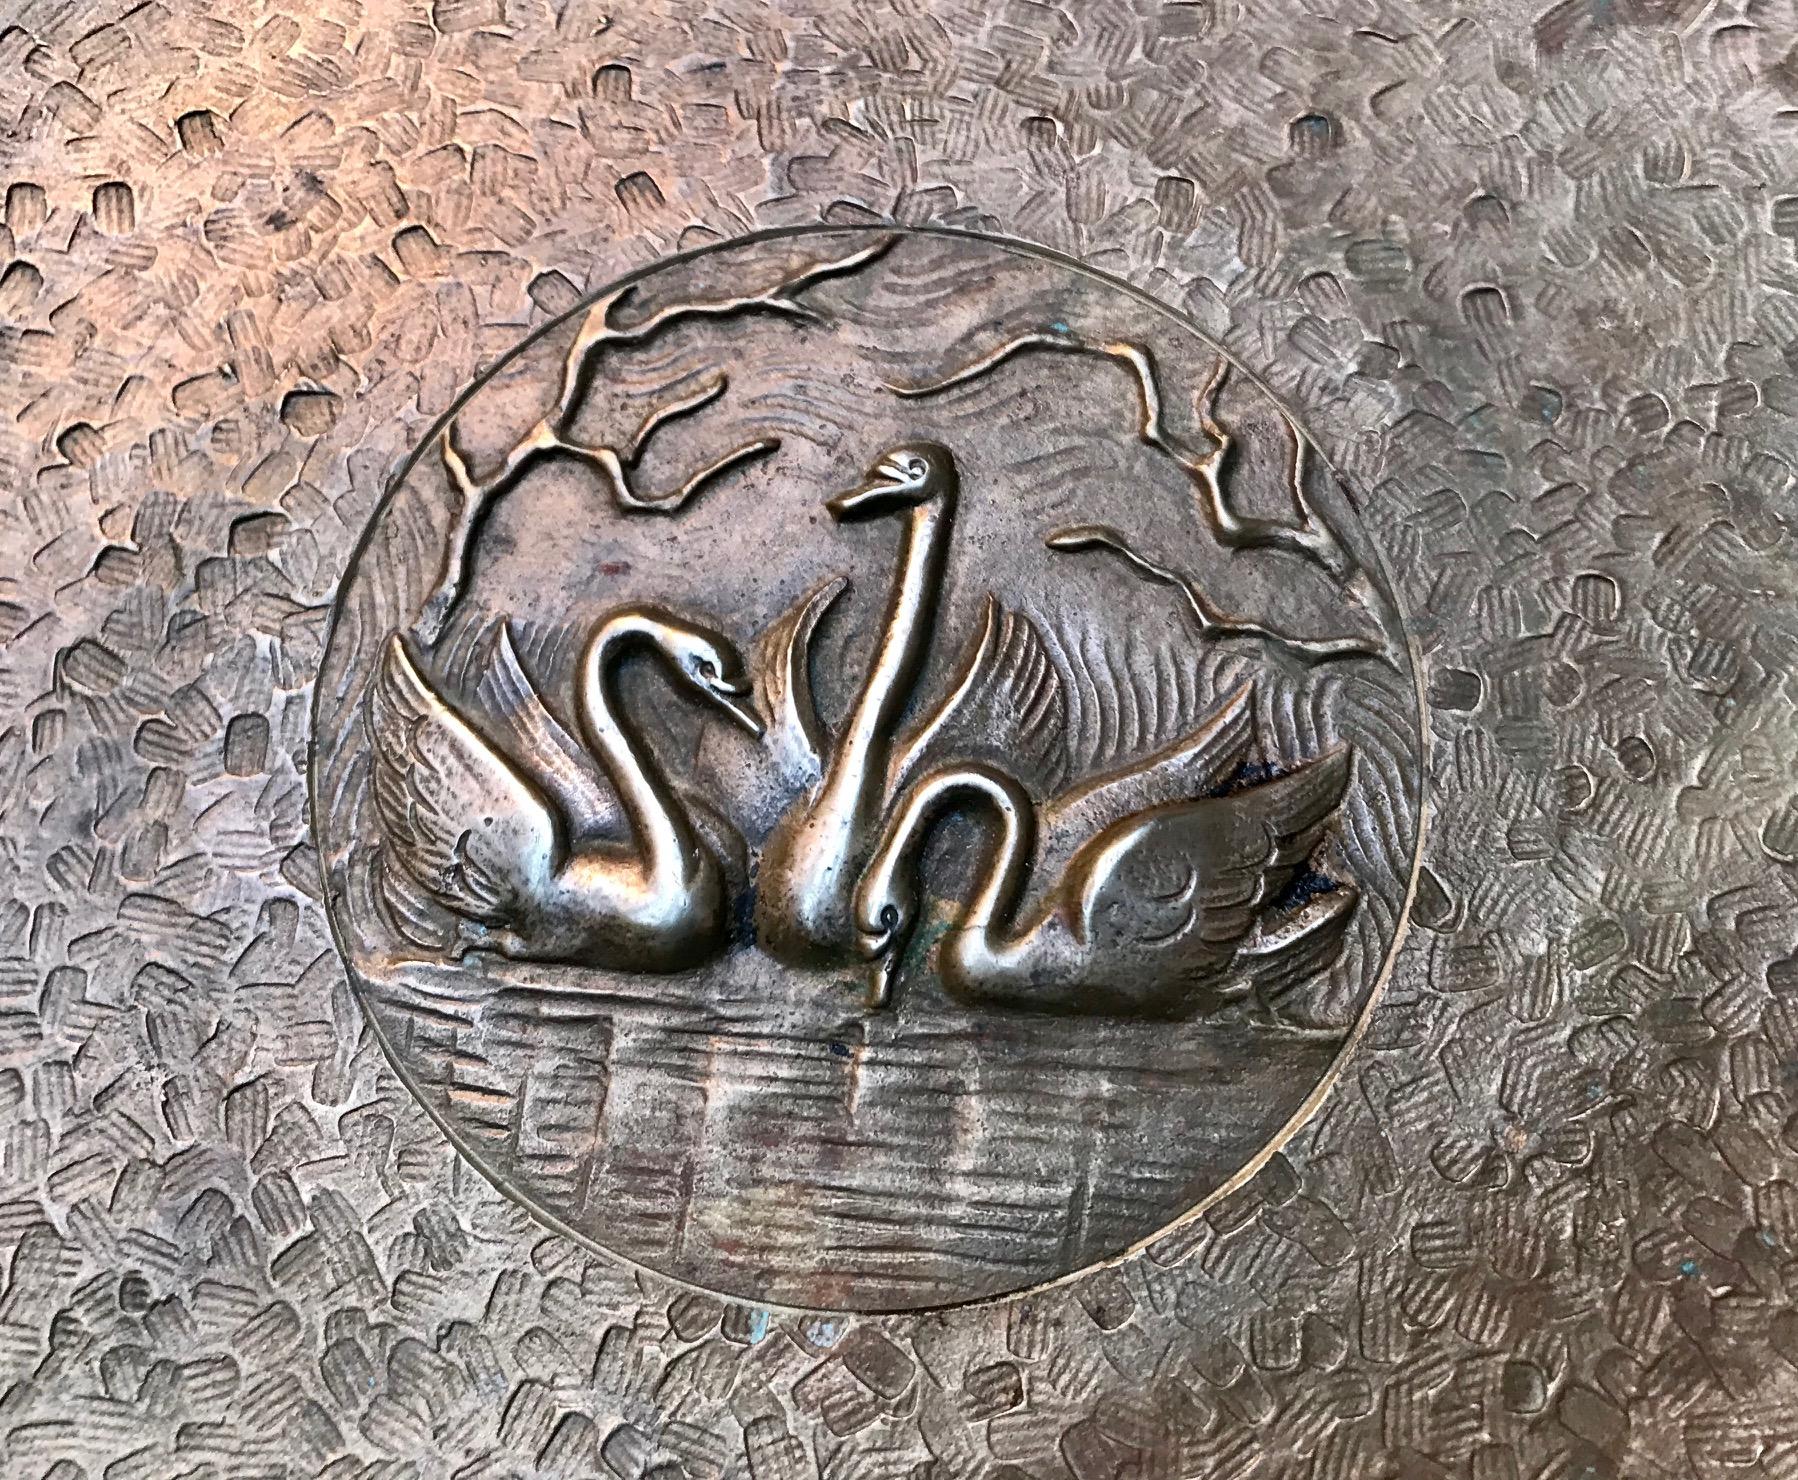 Hand-decorated, textured and heavy Art Deco bronze bowl or dish with a center-motif of swans in relief. Designed and manufactured by Tinos in Copenhagen Denmark during the 1930s. The same period Just Andersen took the world by storm with his